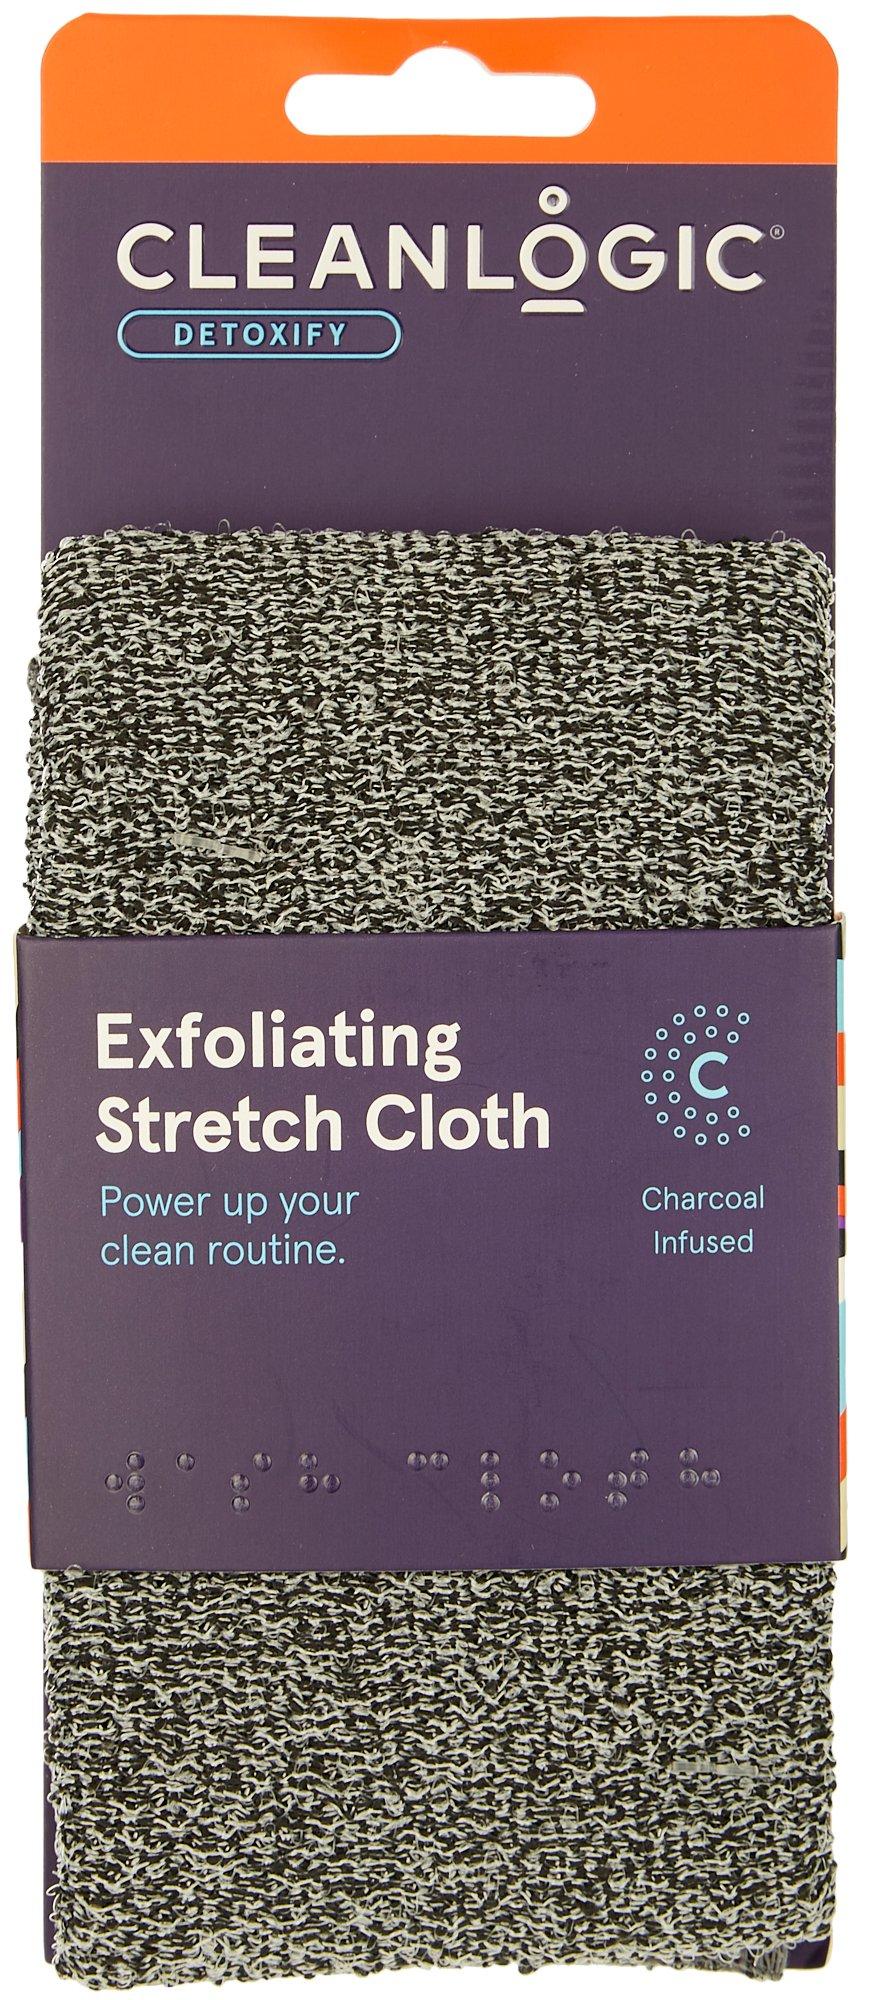 Charcoal Infused Exfoliating Stretch Cloth